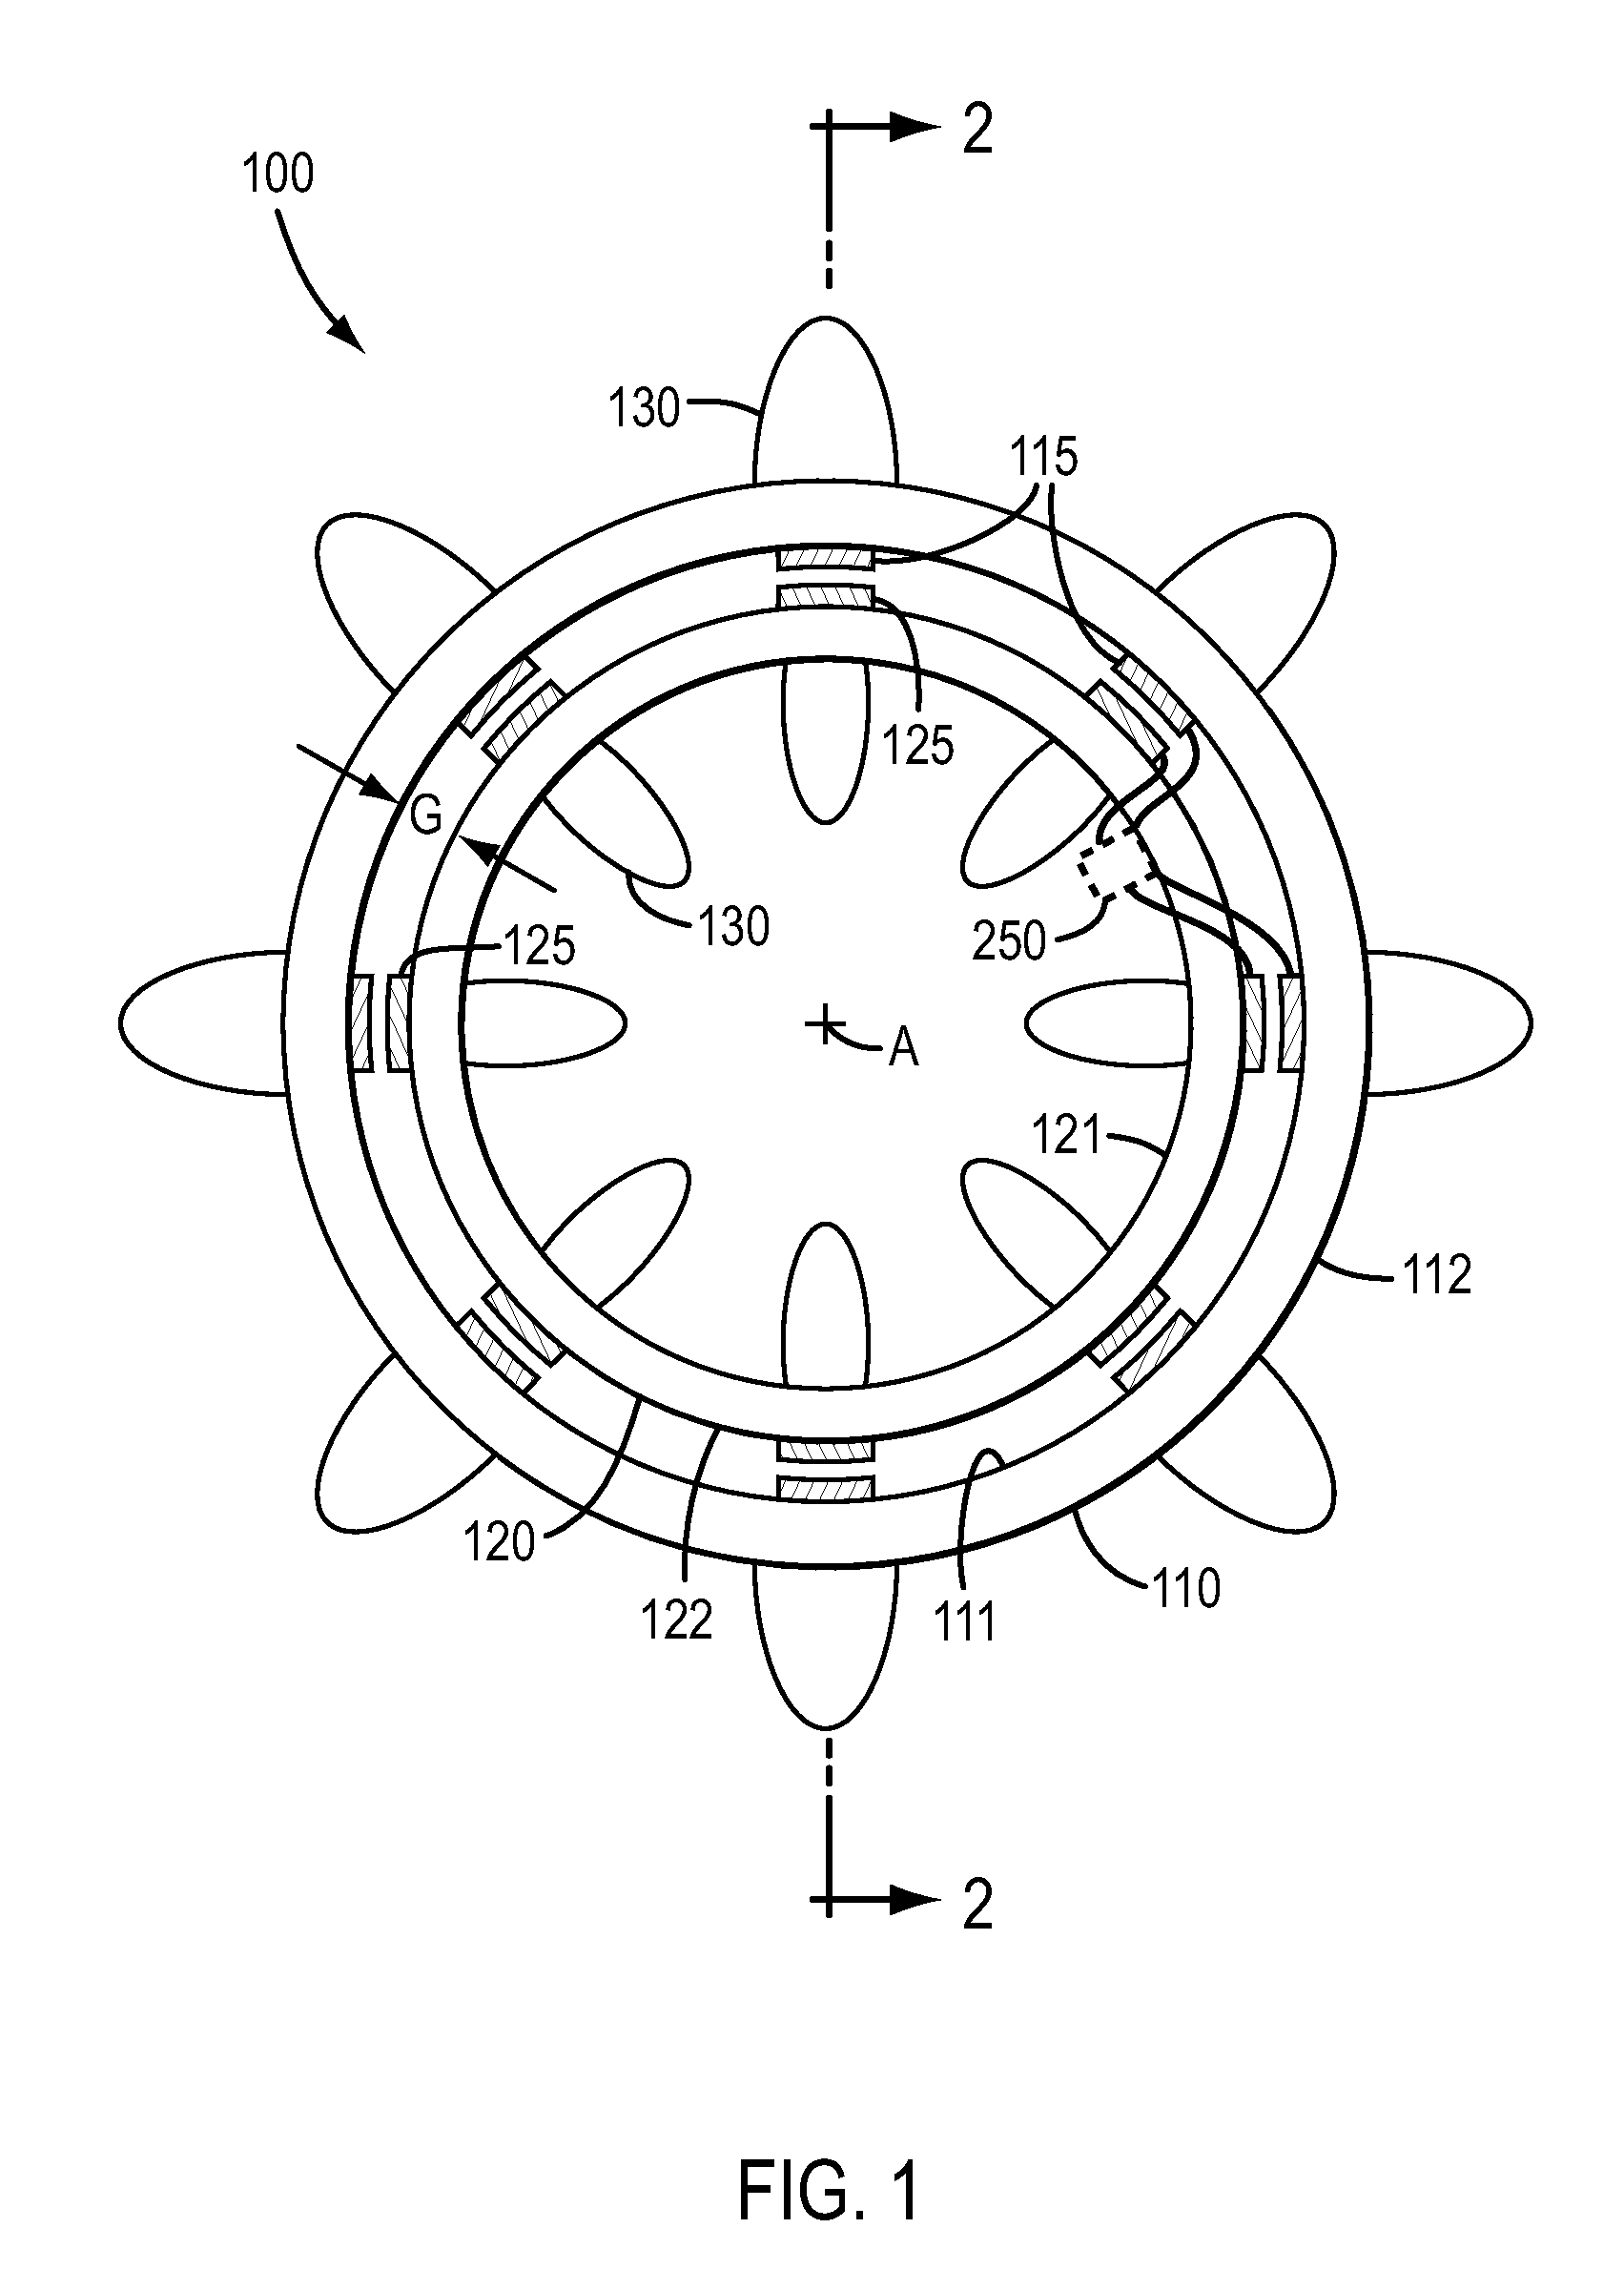 Energy conversion systems and methods